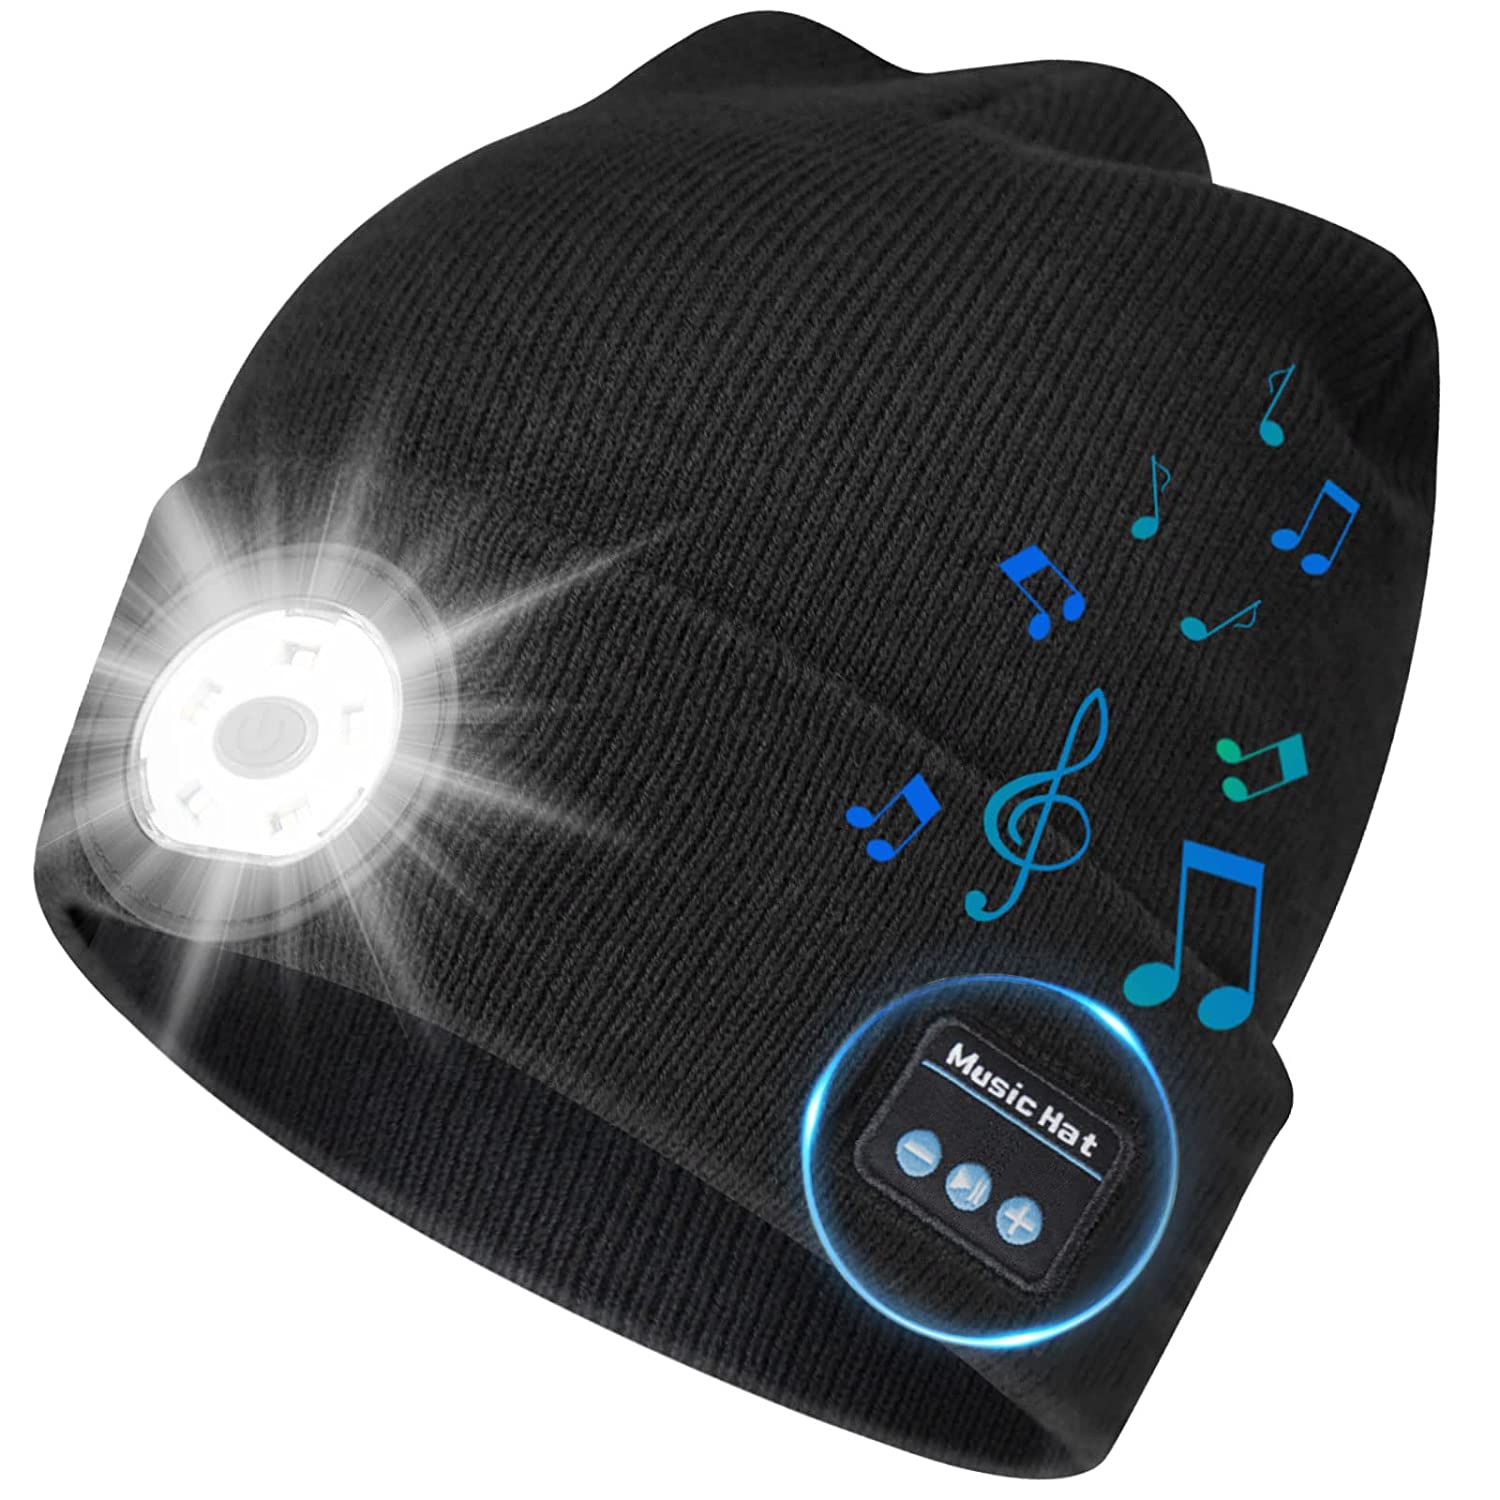  PEATOP® Bluetooth Beanie Hat with Headphones with Built-in Stereo Speaker and Microphone